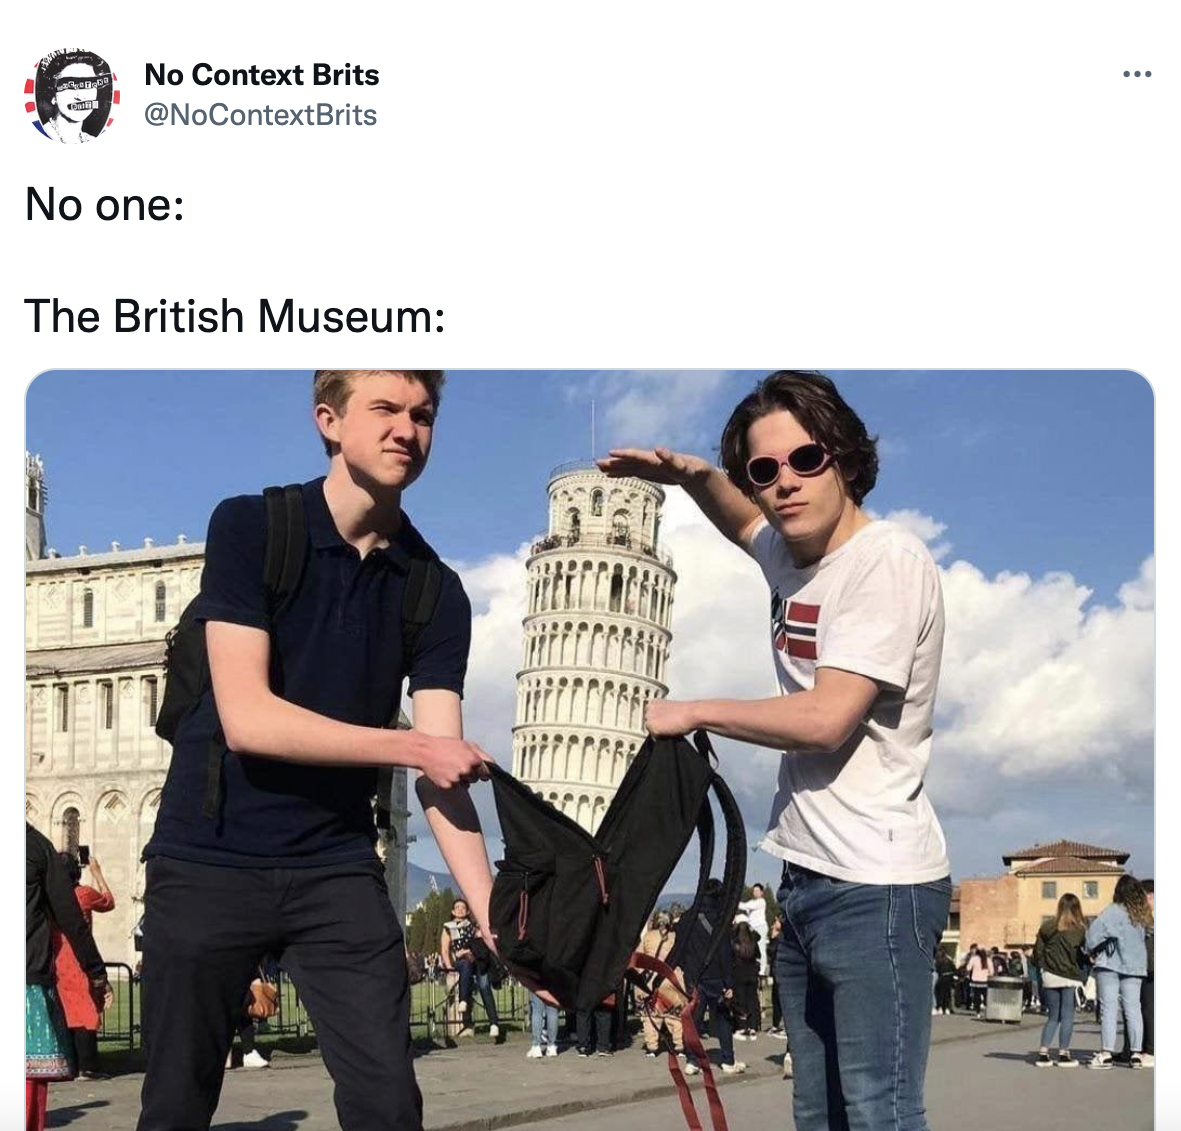 British Stereotypes - piazza dei miracoli - . No Context Brits No one The British Museum